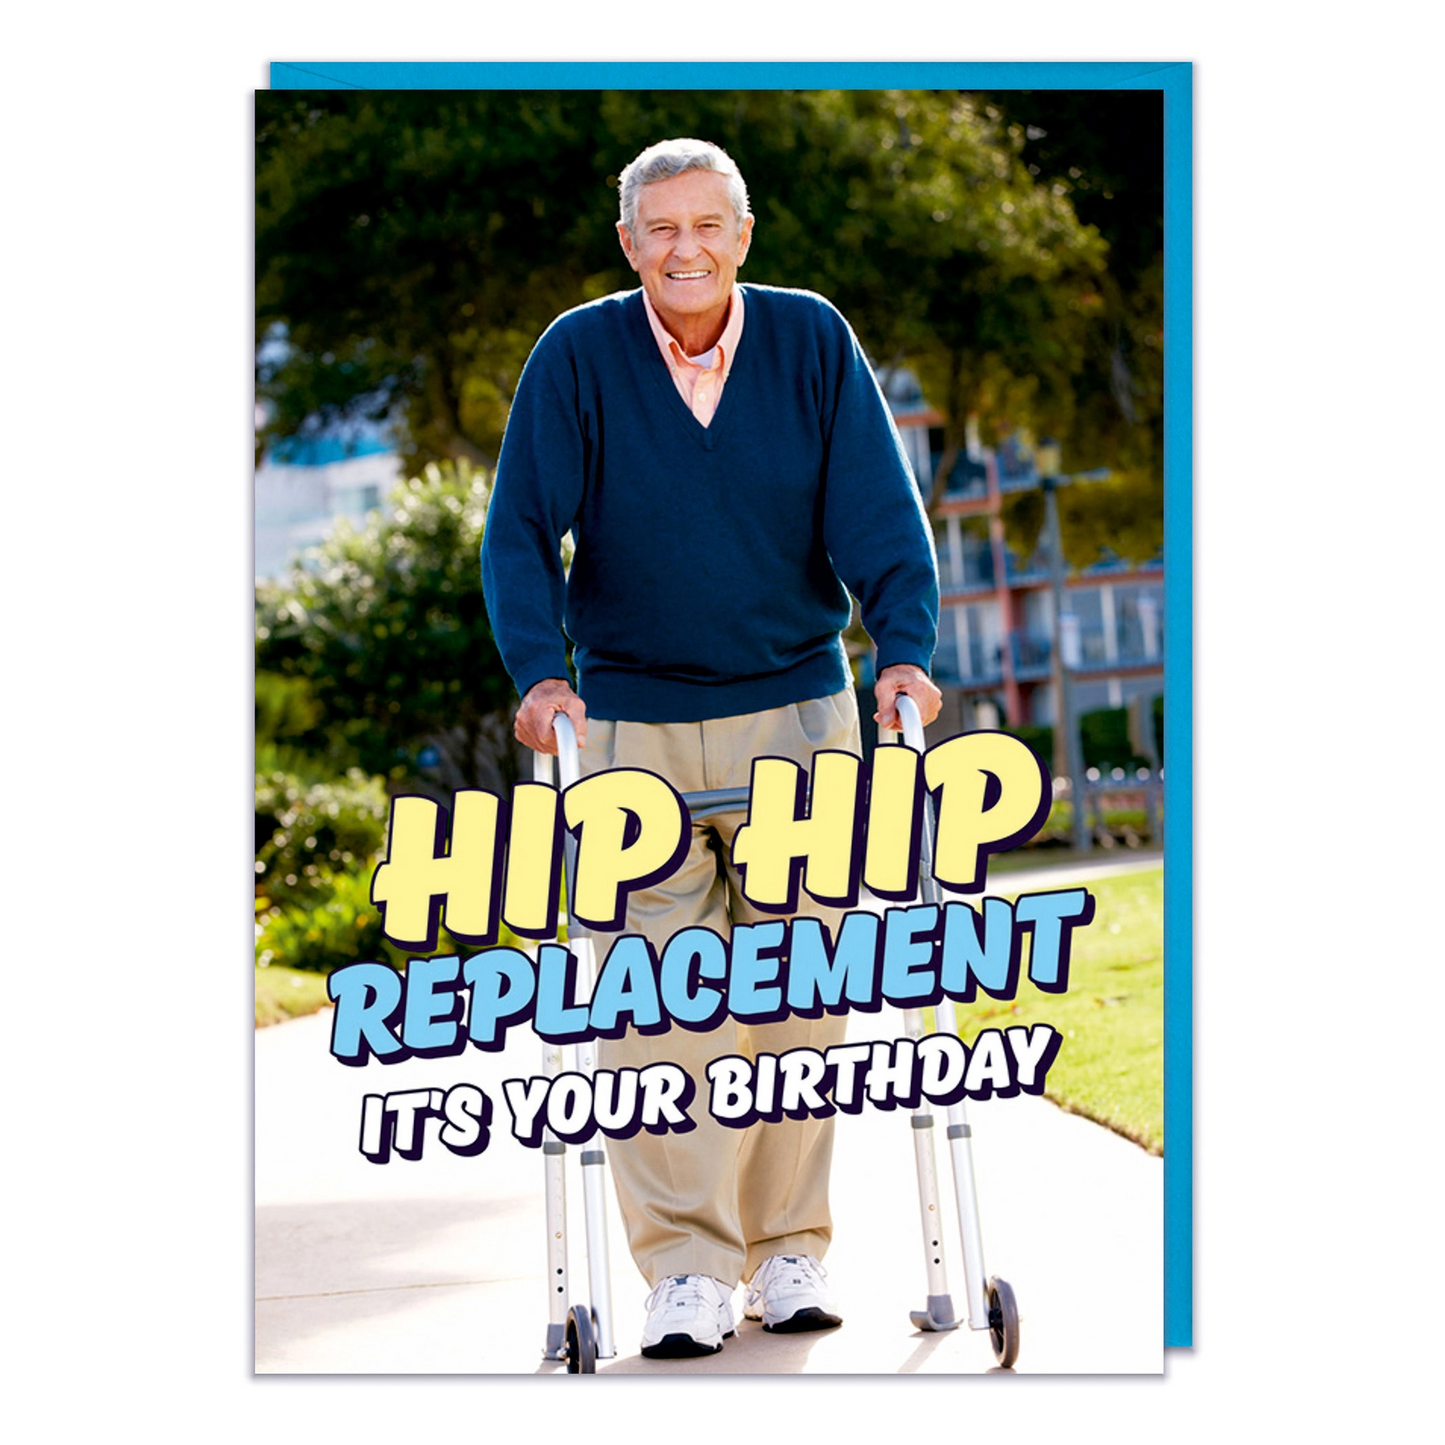 Hip Hip Replacement For Your Birthday - Birthday Greeting Card - Mellow Monkey